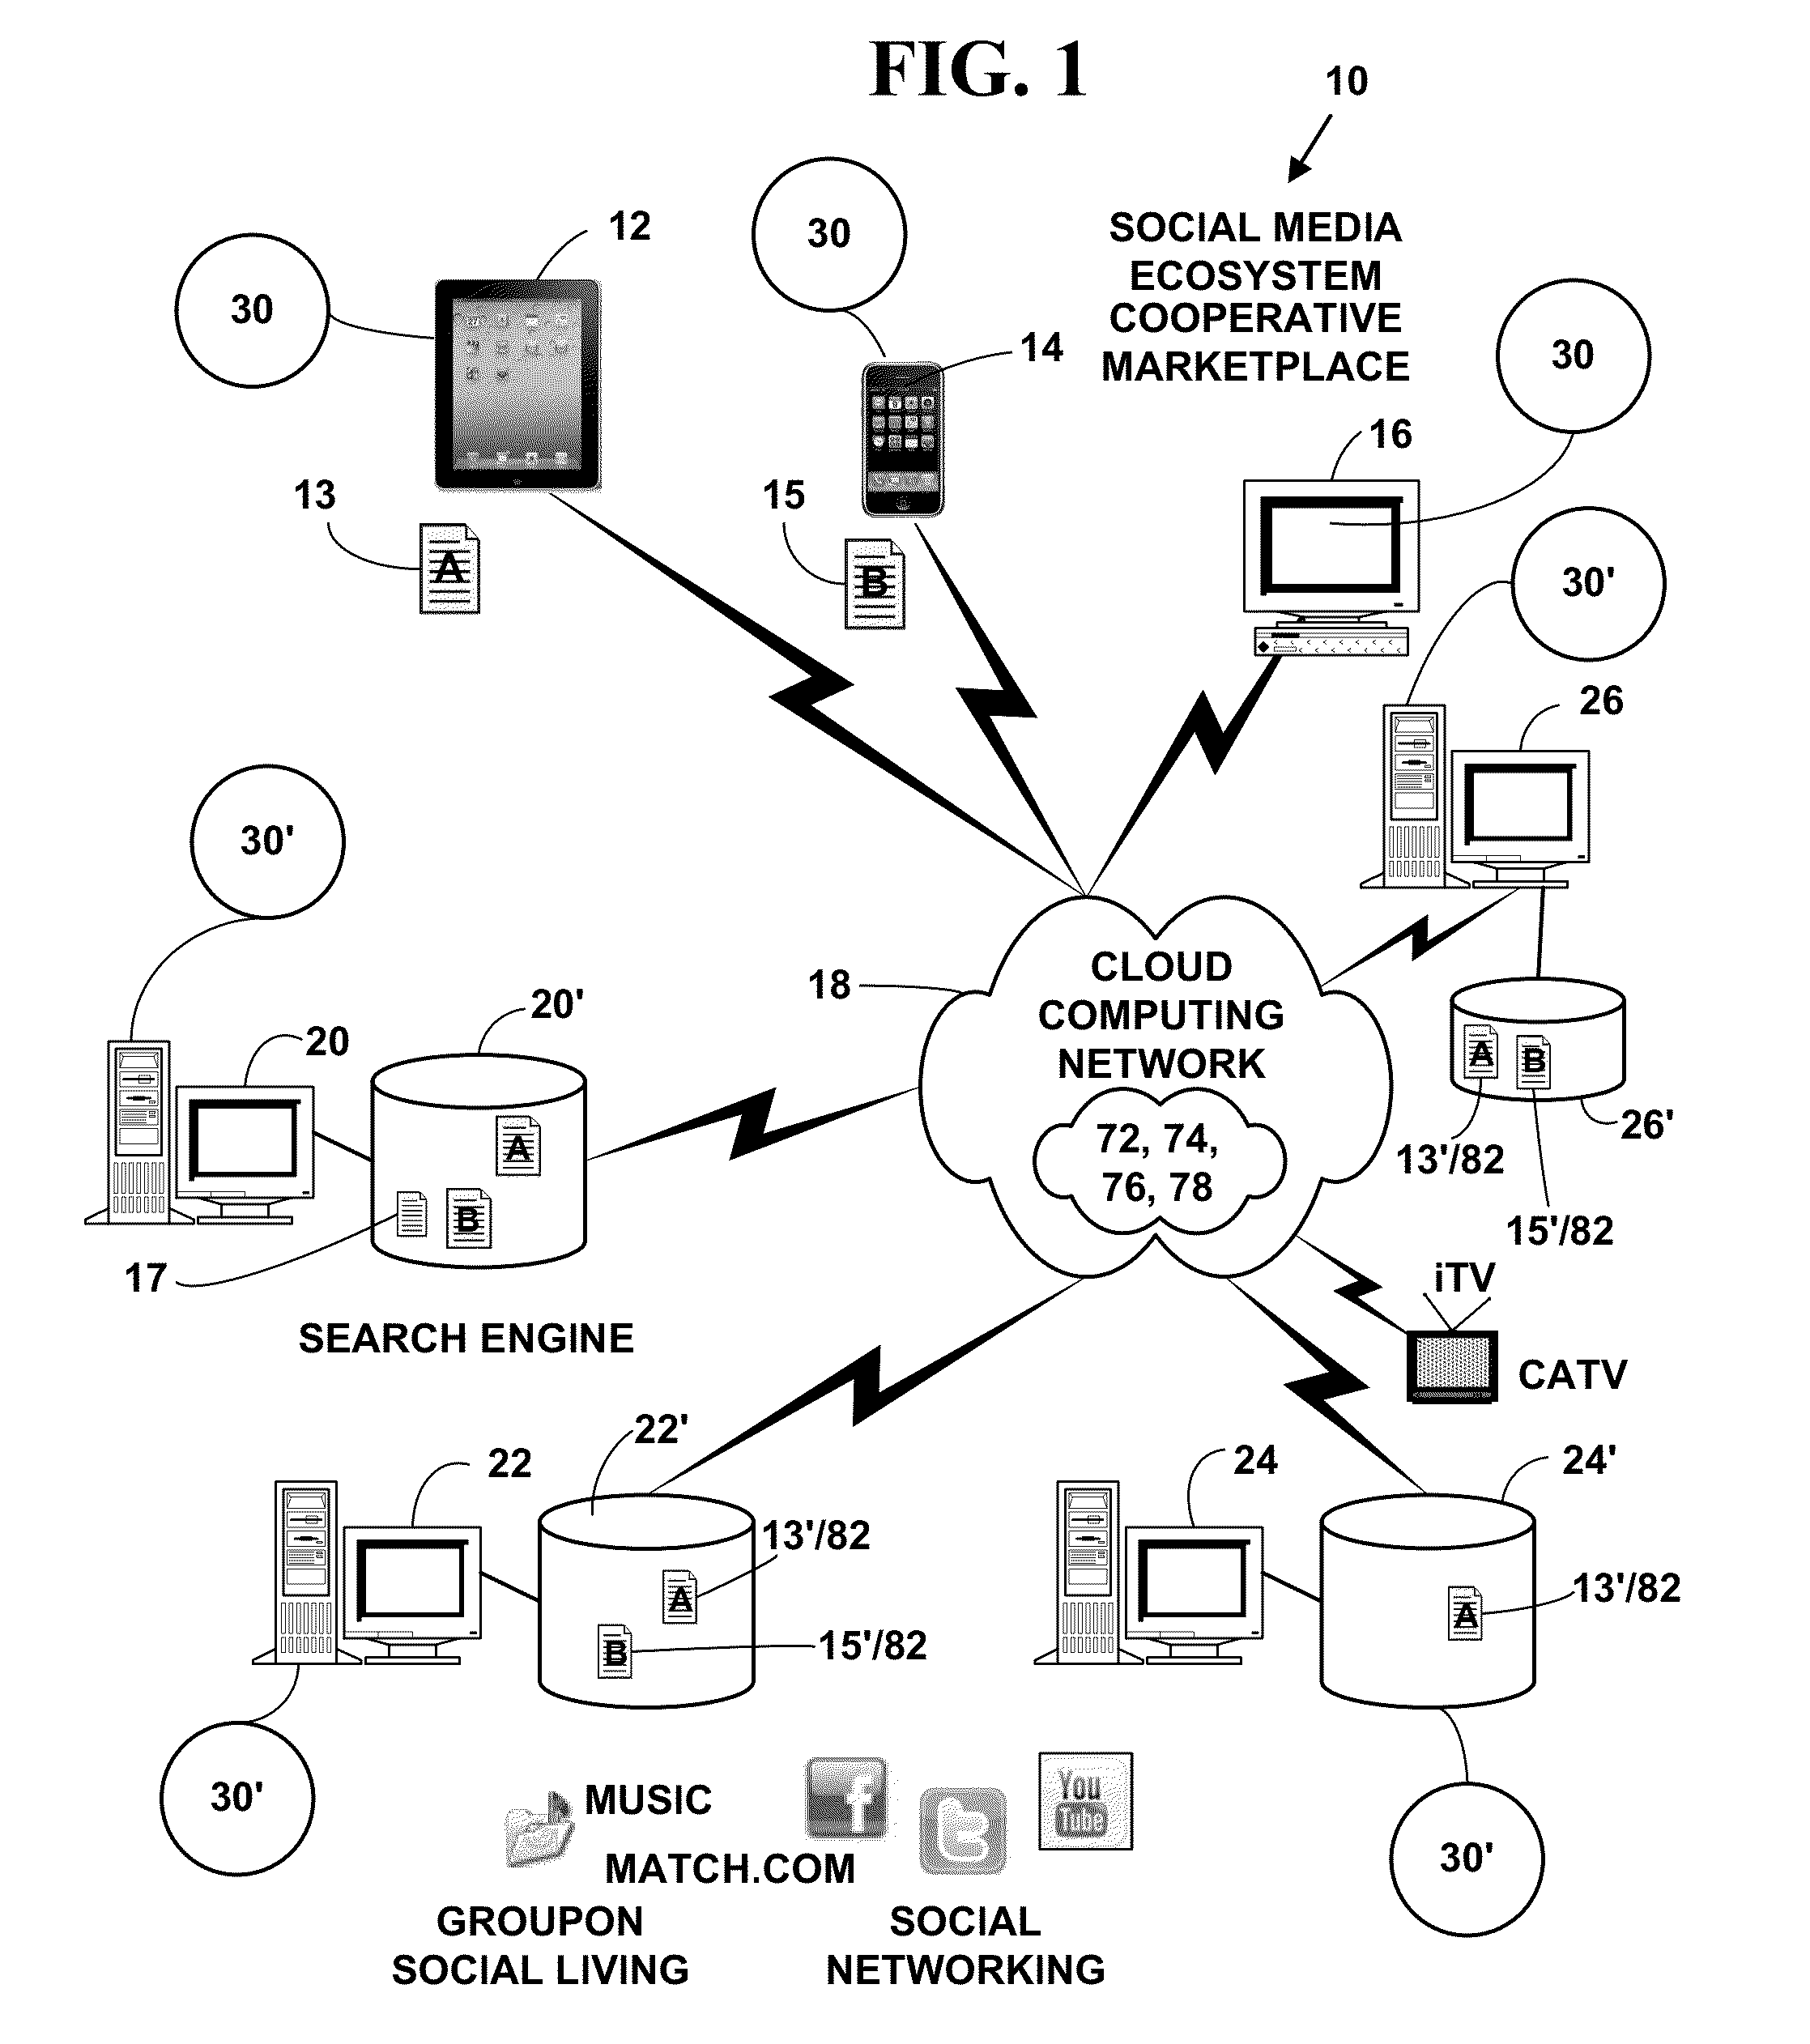 Method and system for providing a social media ecosystem cooperative marketplace